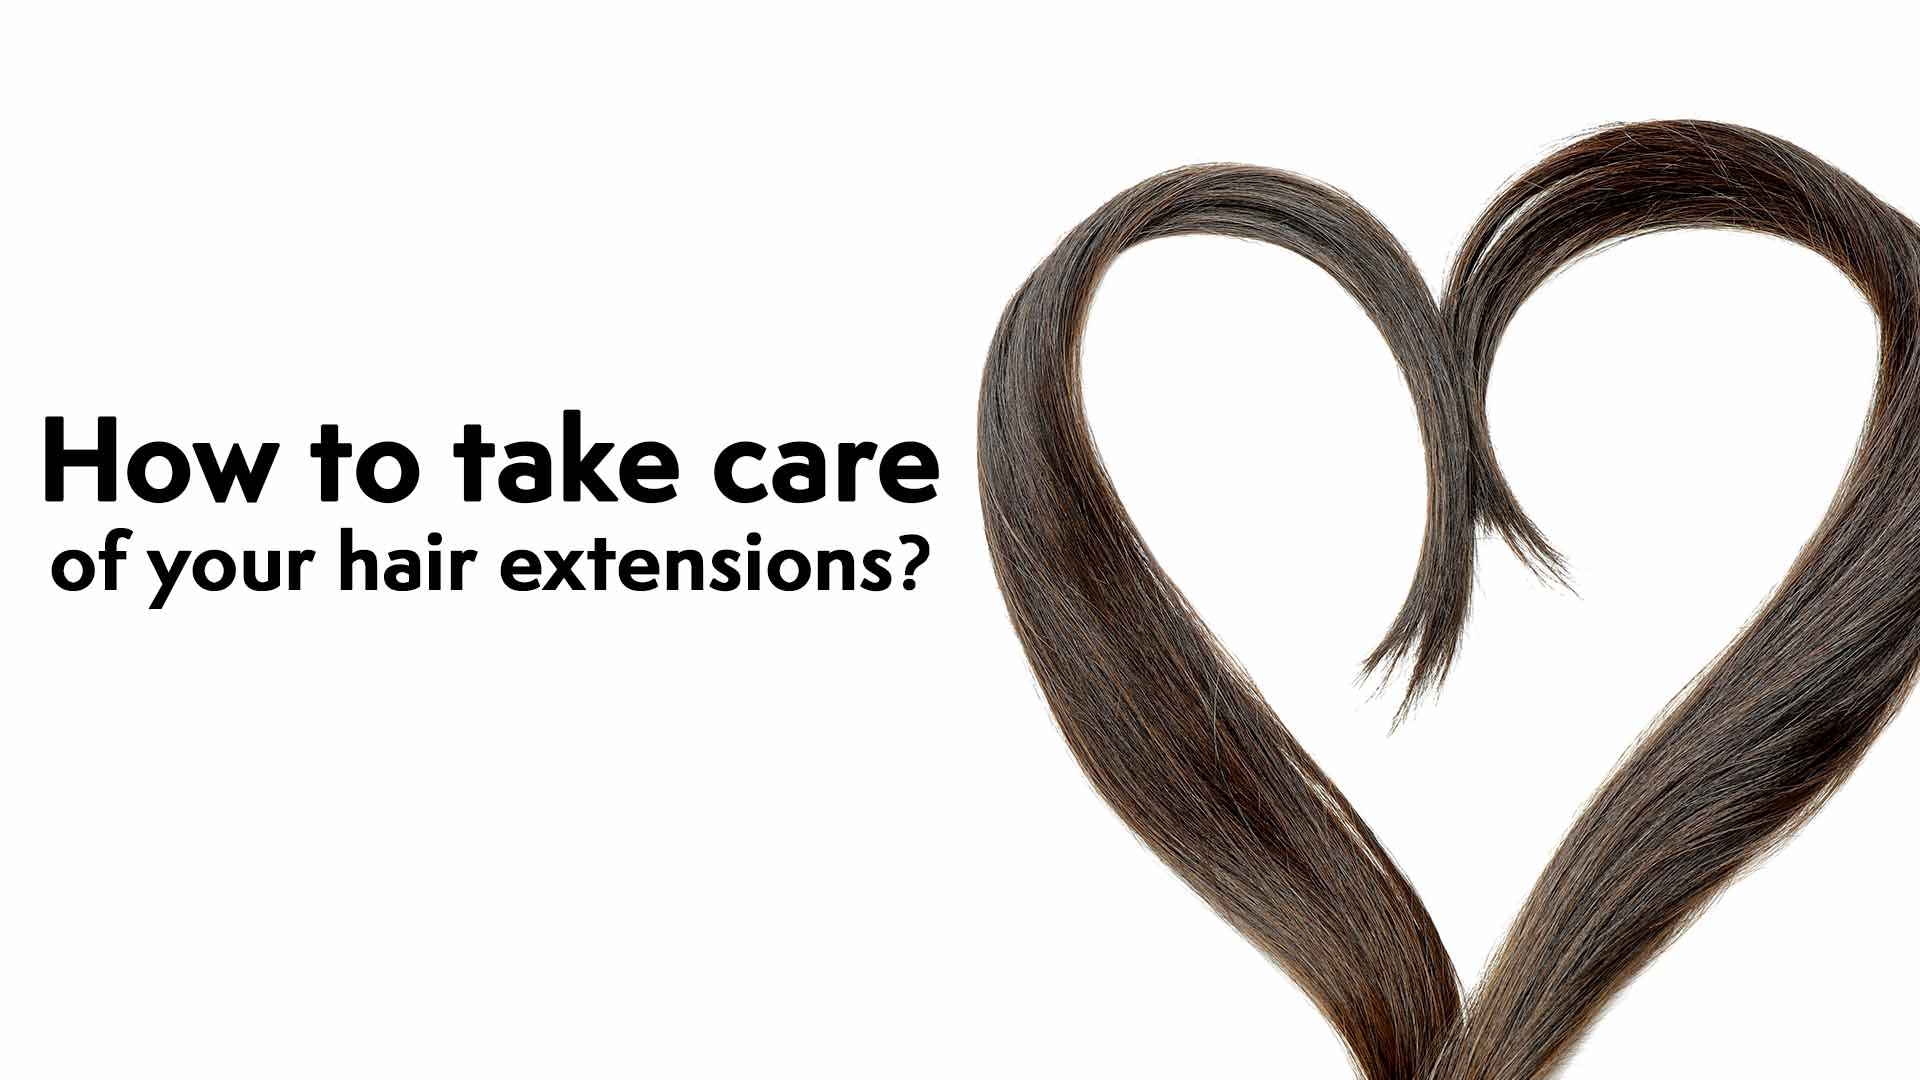 How to take care of your hair extensions?